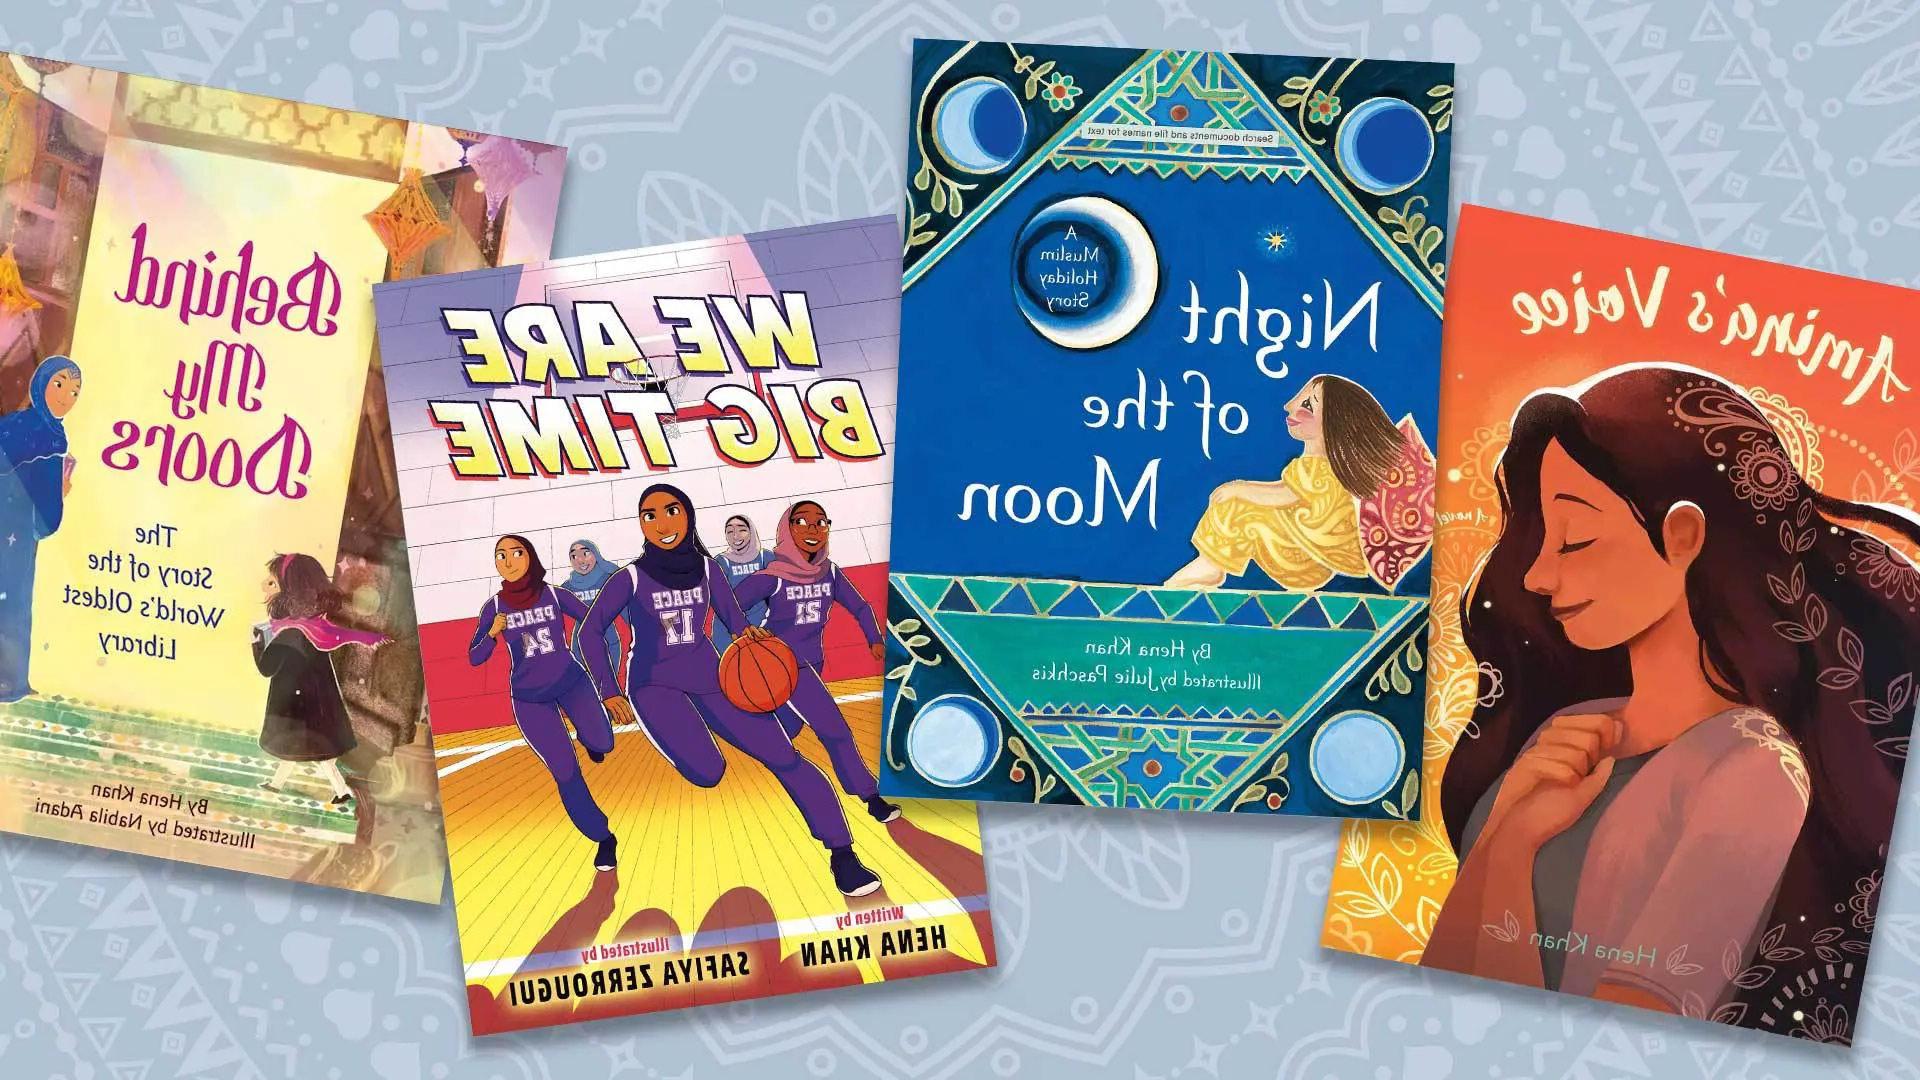 Hena Khan ’95, has published 24 books featuring Muslim kids as the main characters. This year, she's releasing five new books, including "We Are Big Time" and "Behind My Doors" (left). "As a young mother, I started thinking about stories I didn't have as a kid where I was the protagonist," she said. Book covers courtesy of Hena Khan.